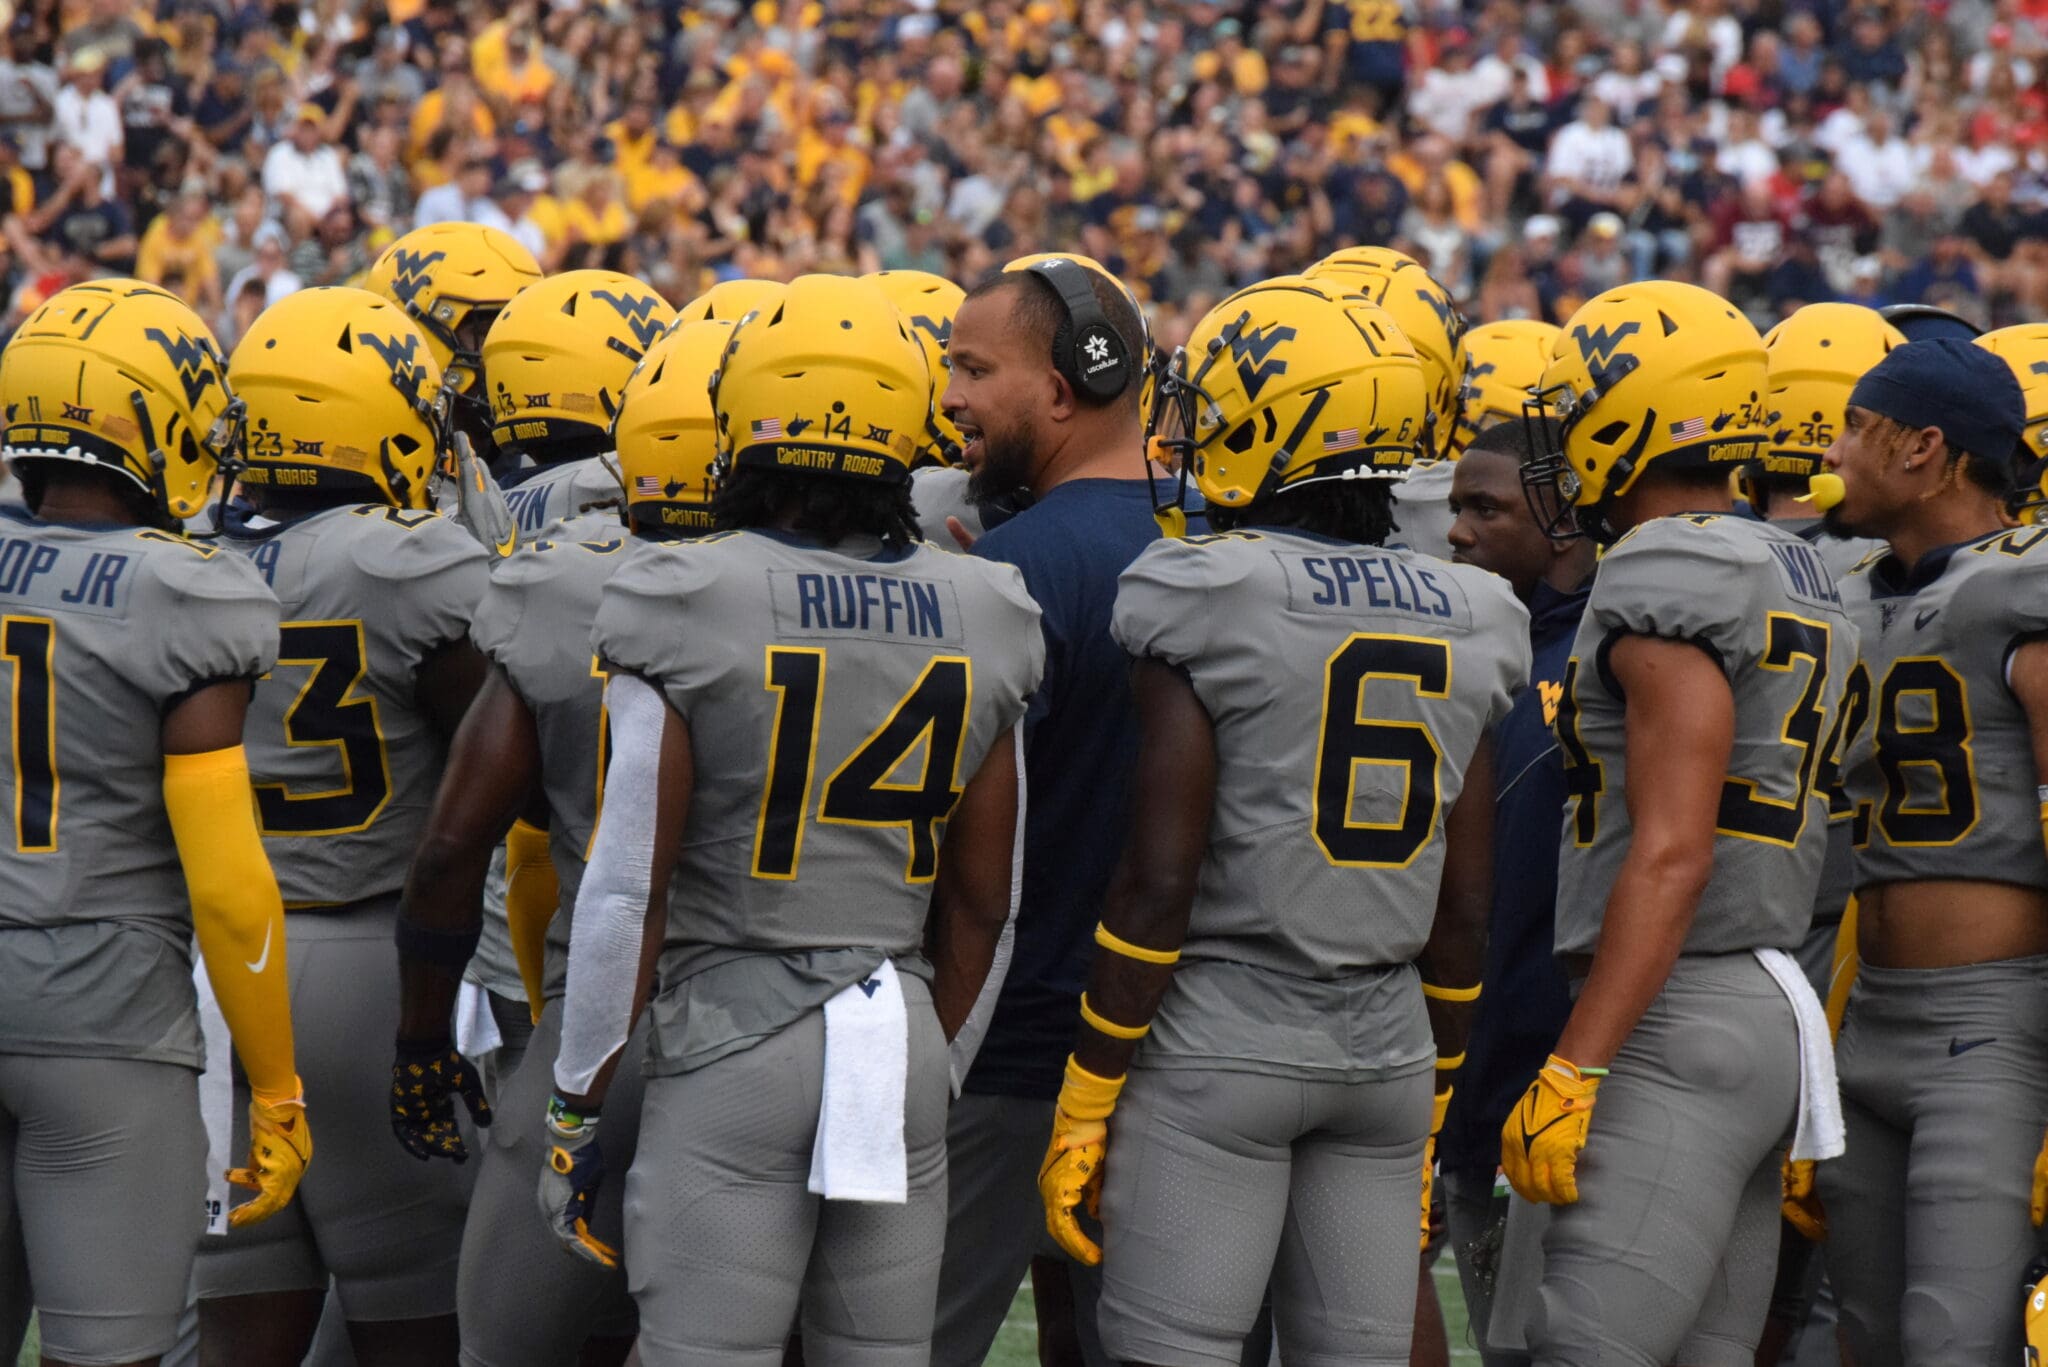 WVU Football Secondary with coach Donate Wright in the middle